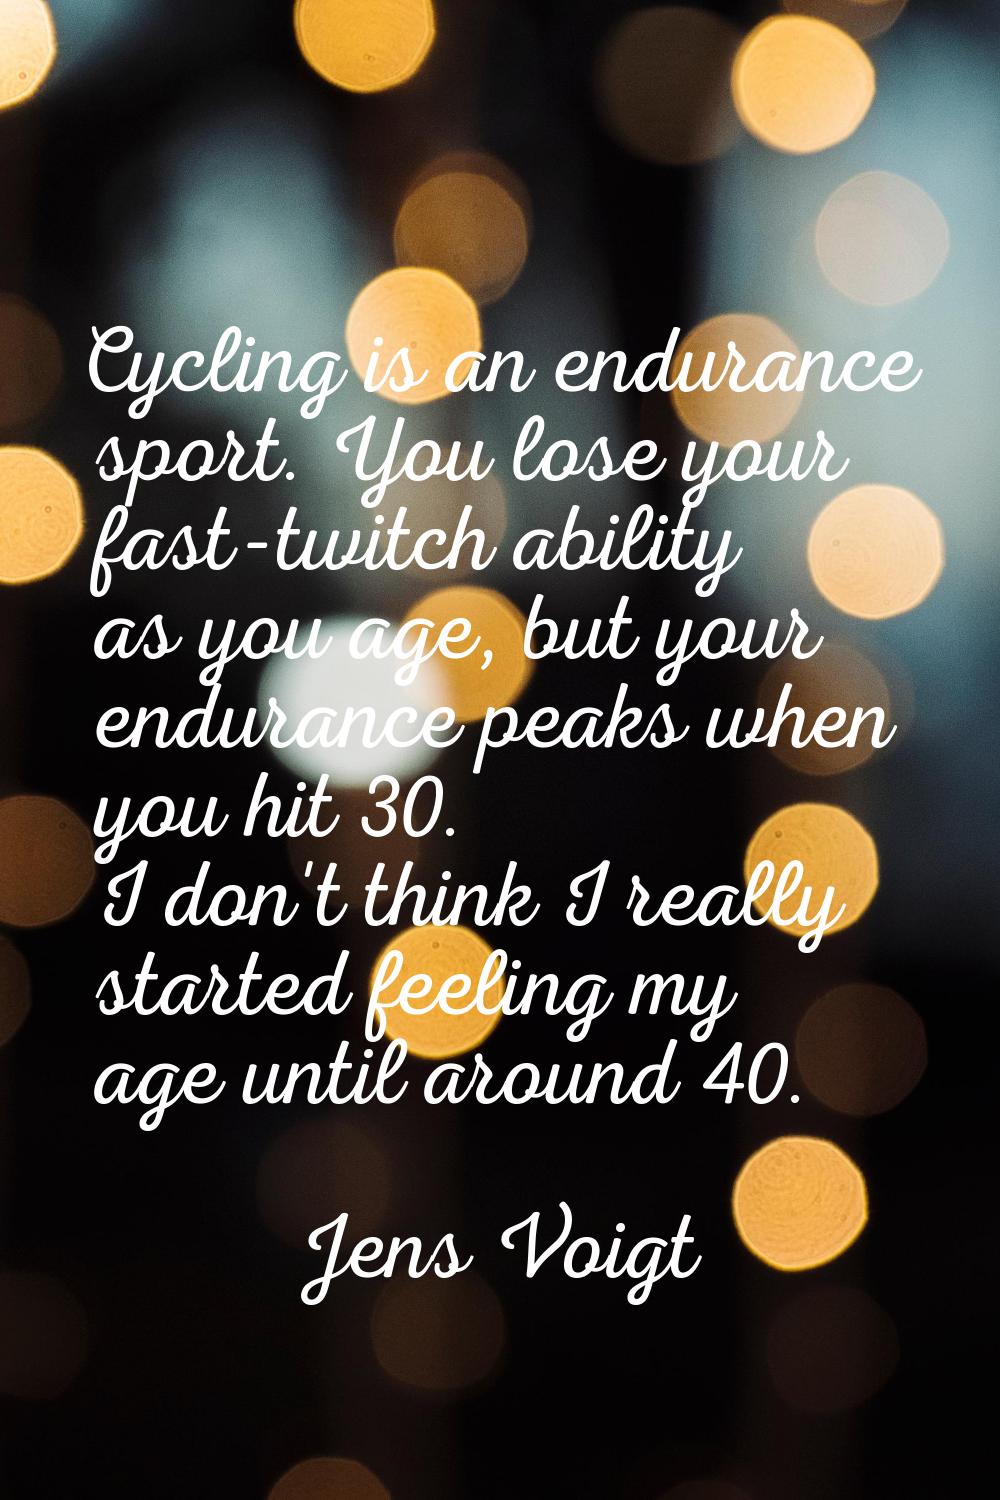 Cycling is an endurance sport. You lose your fast-twitch ability as you age, but your endurance pea